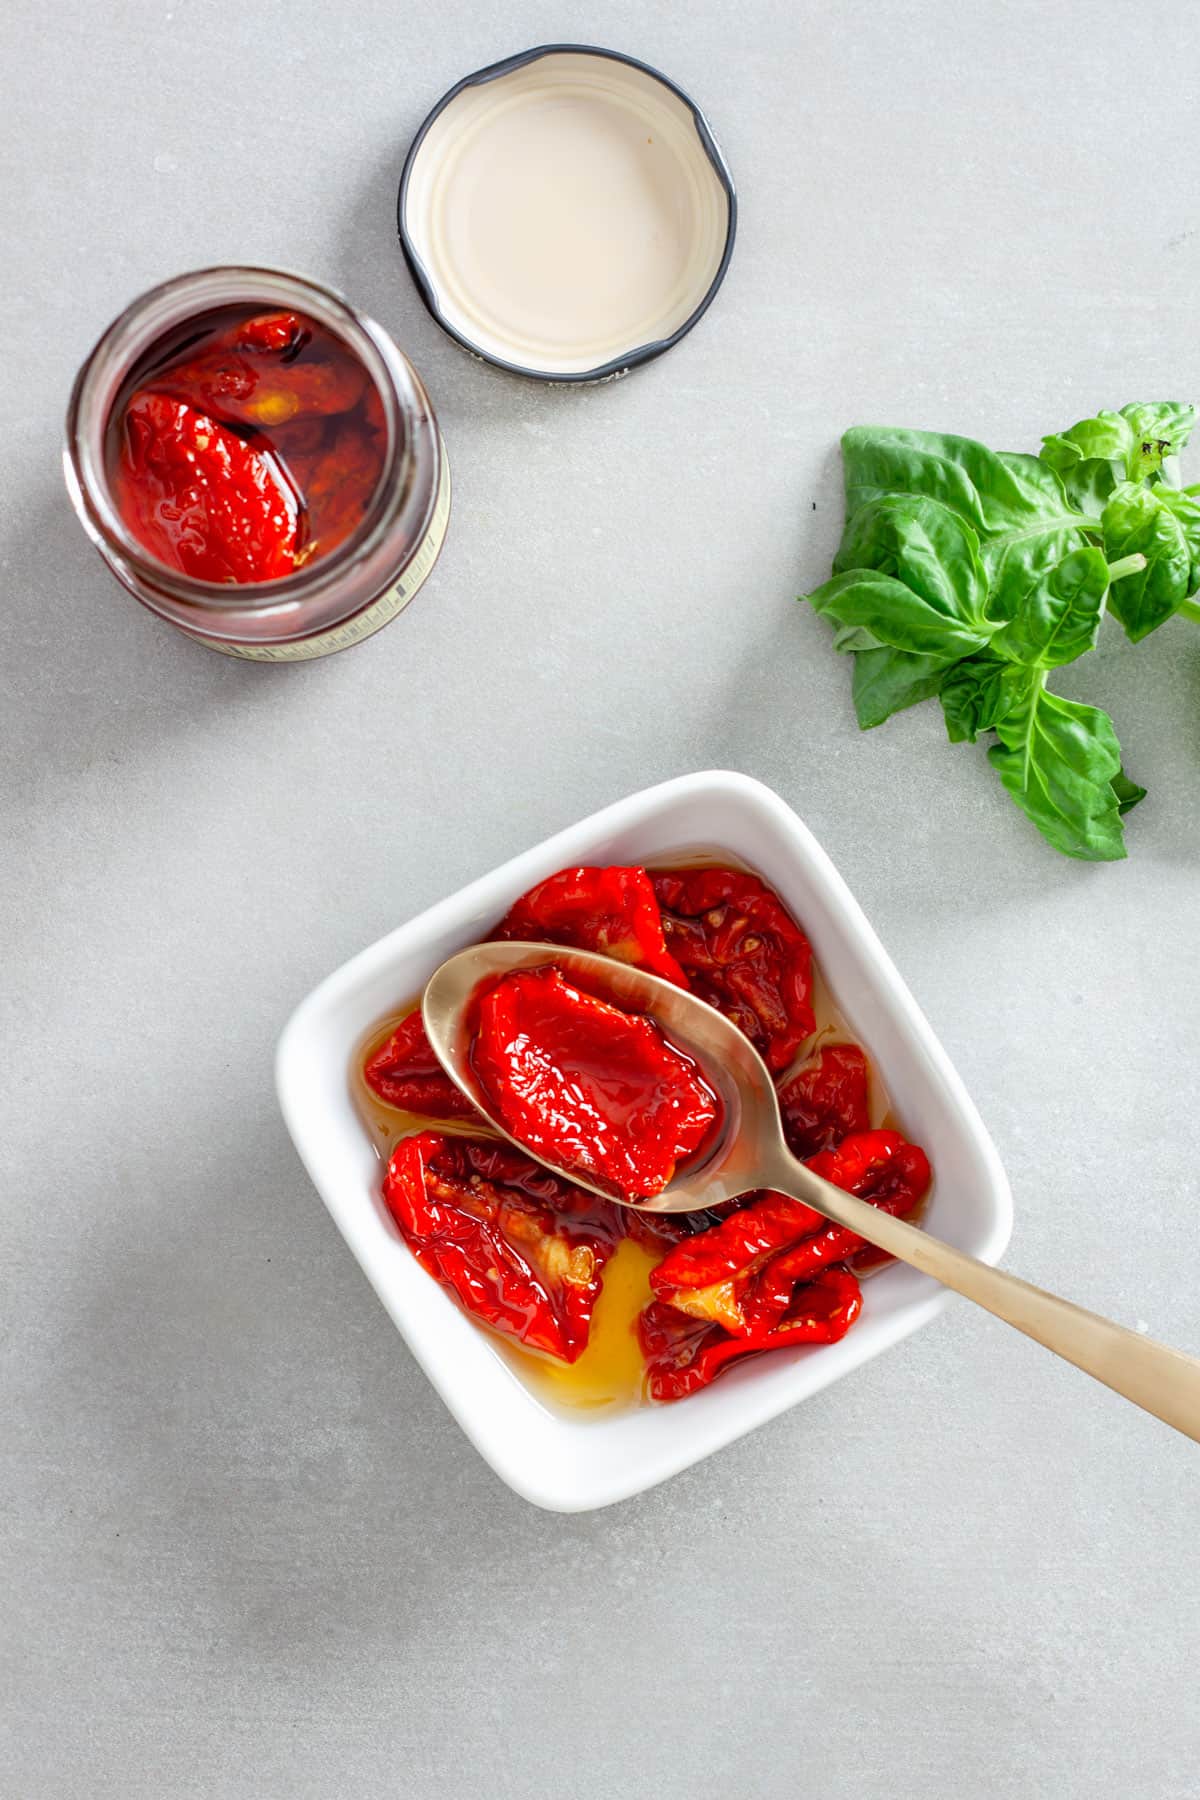 Whole sun-dried tomatoes in oil in a small white bowl with some basil off to the side.